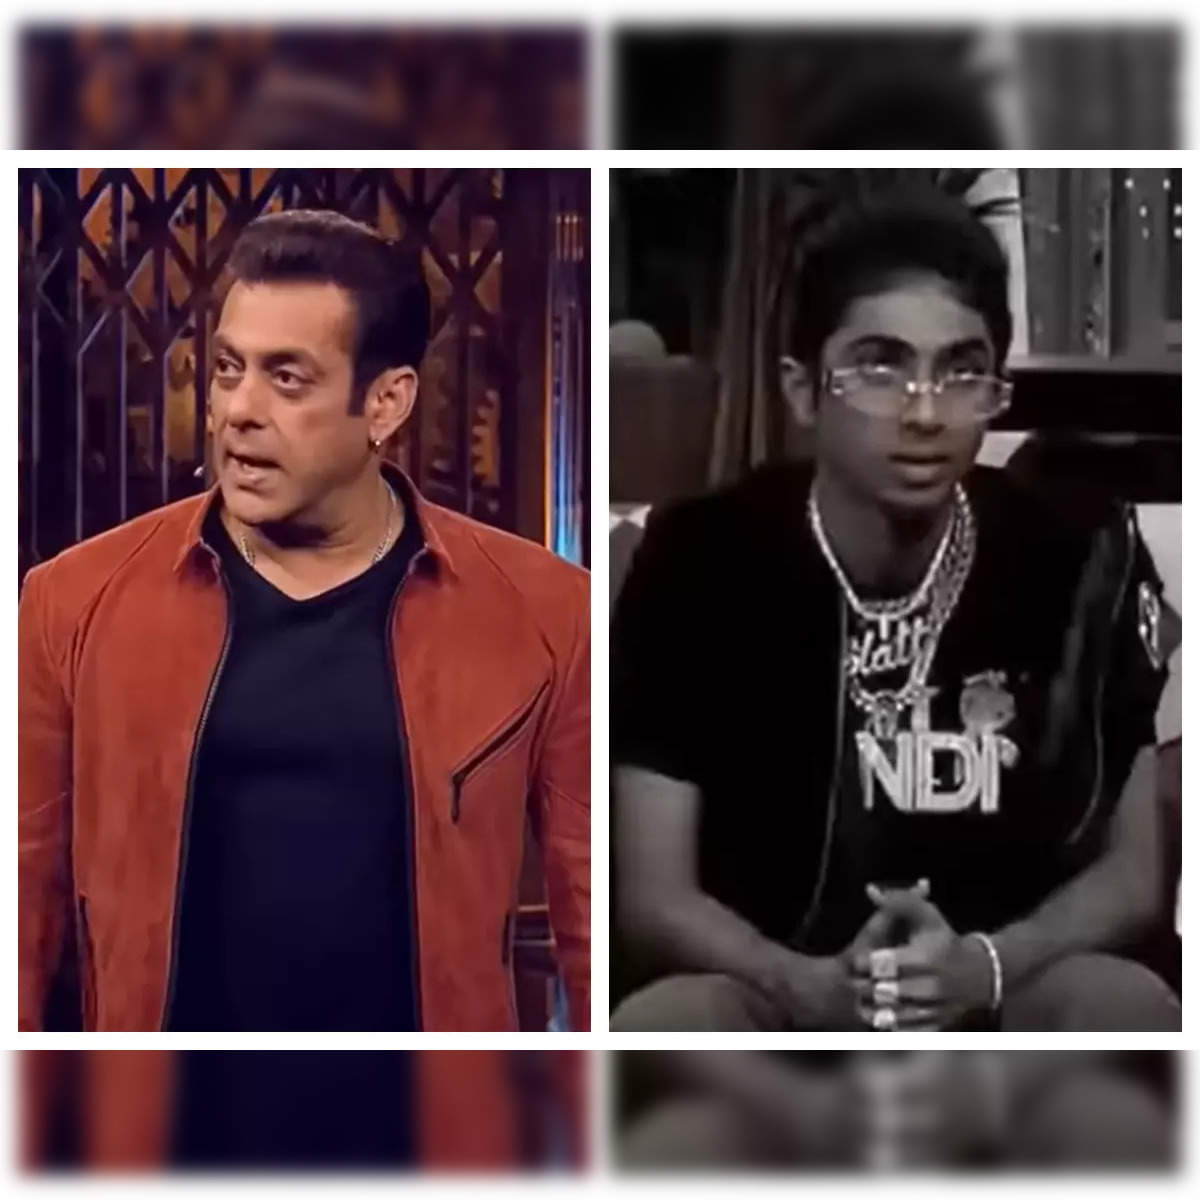 Here is all you need to know about Salman khan's controversial show BIG BOSS  16's most talked about contestant MC Stan.